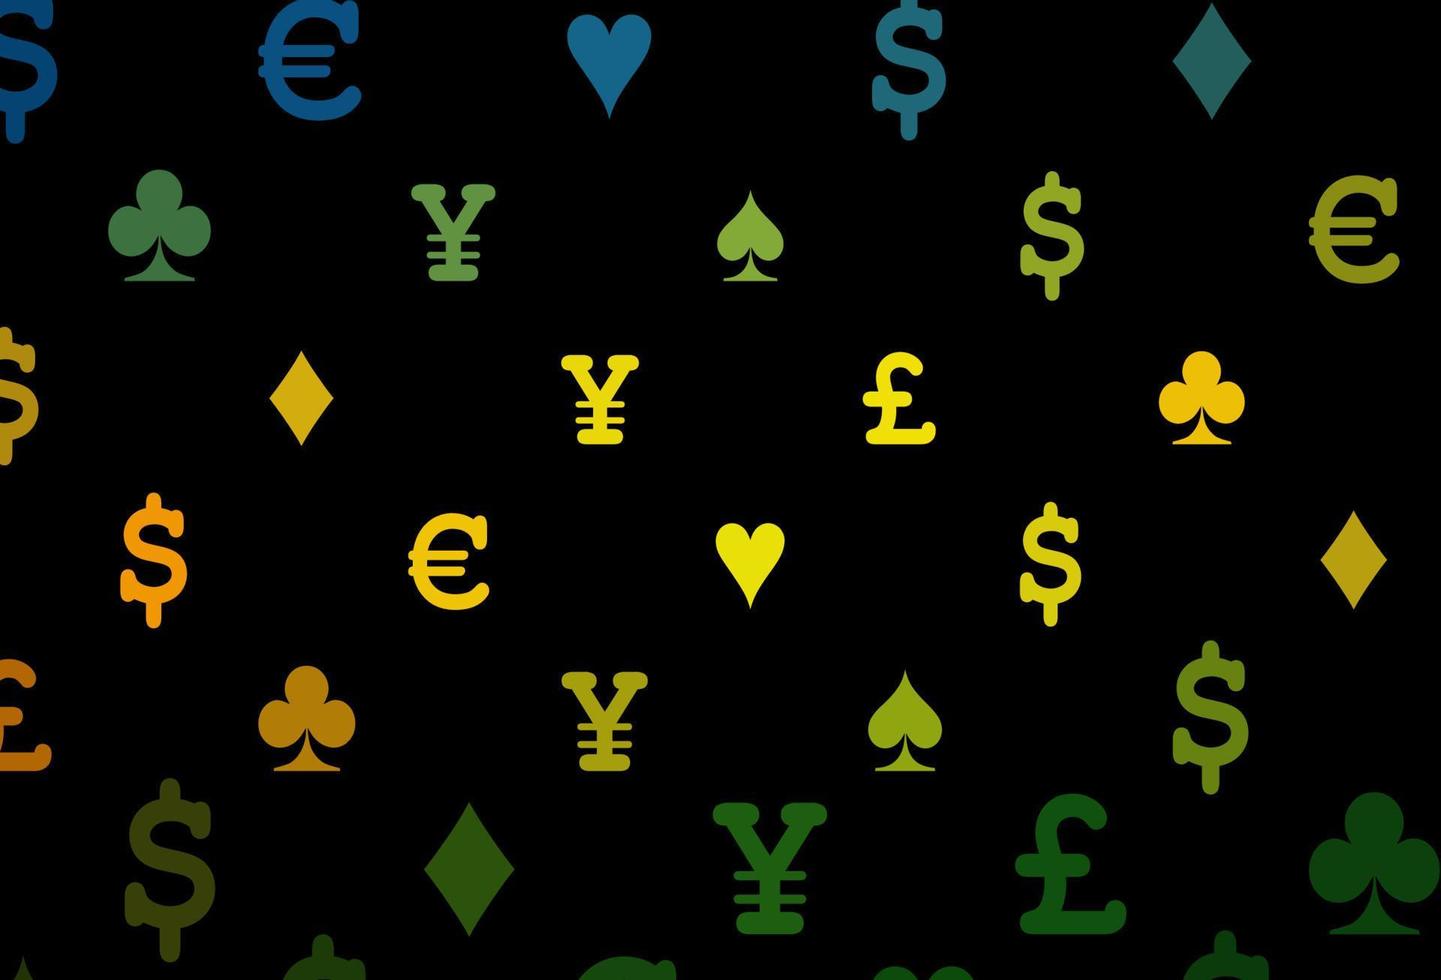 Dark blue, yellow vector template with poker symbols.